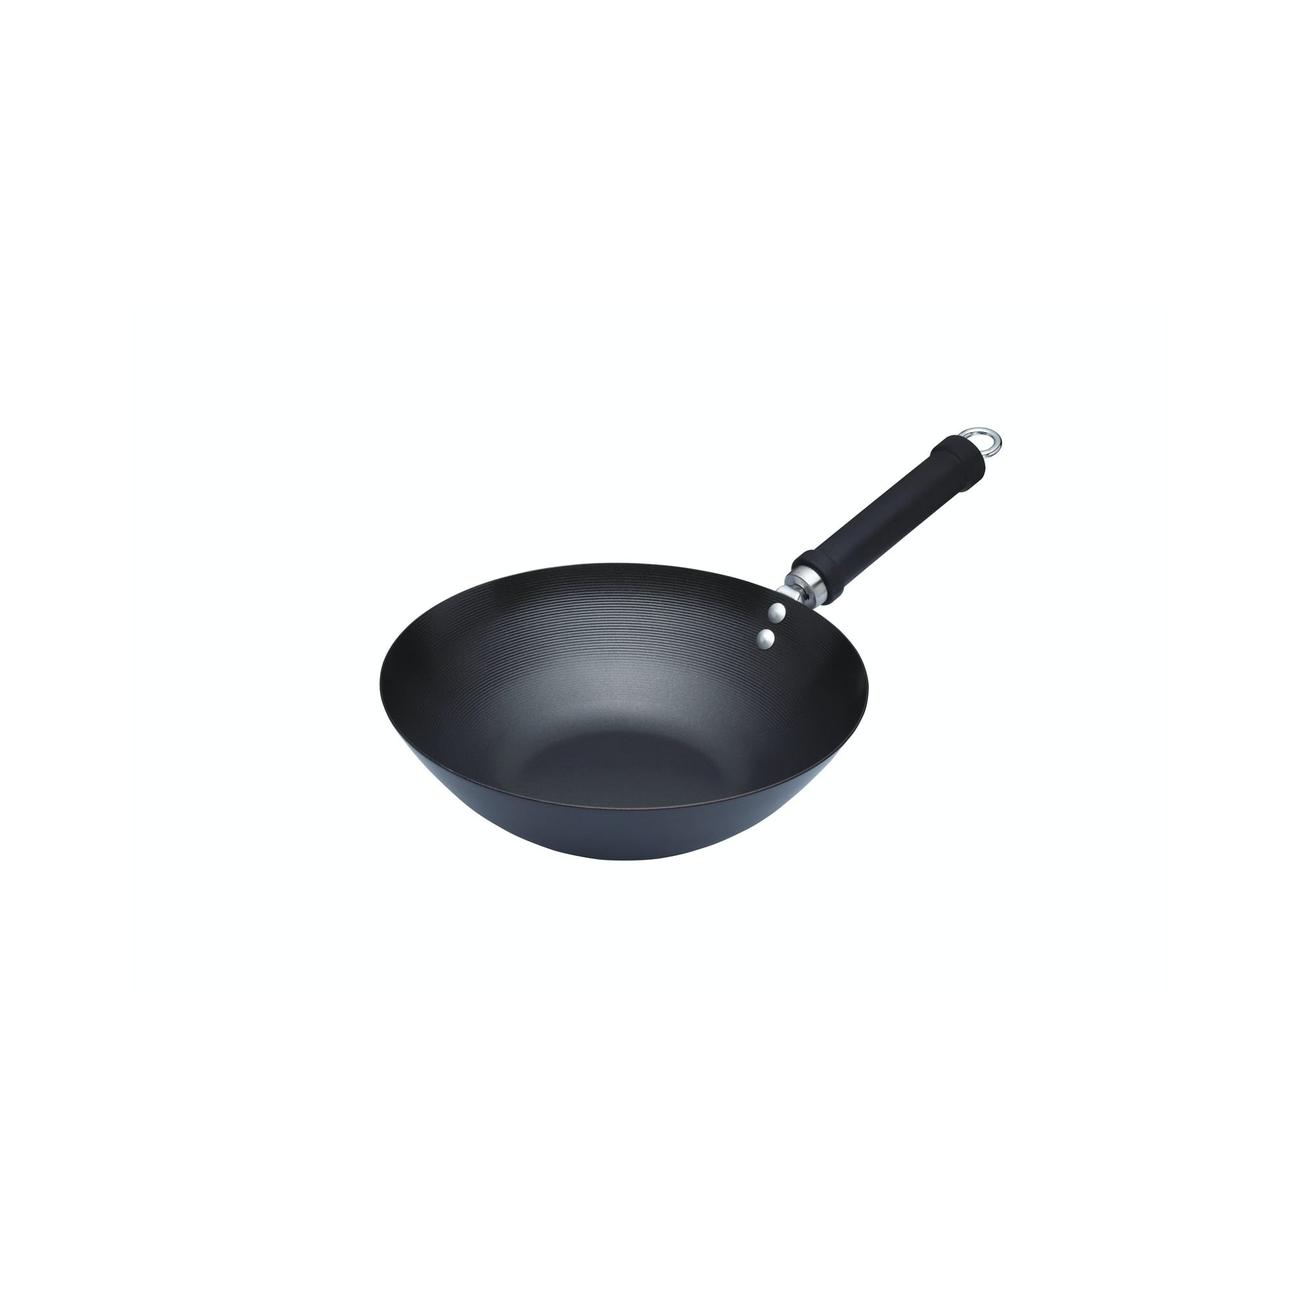 https://www.thekitchenwhisk.ie/contentFiles/productImages/Large/Wok26.5cm.jpg